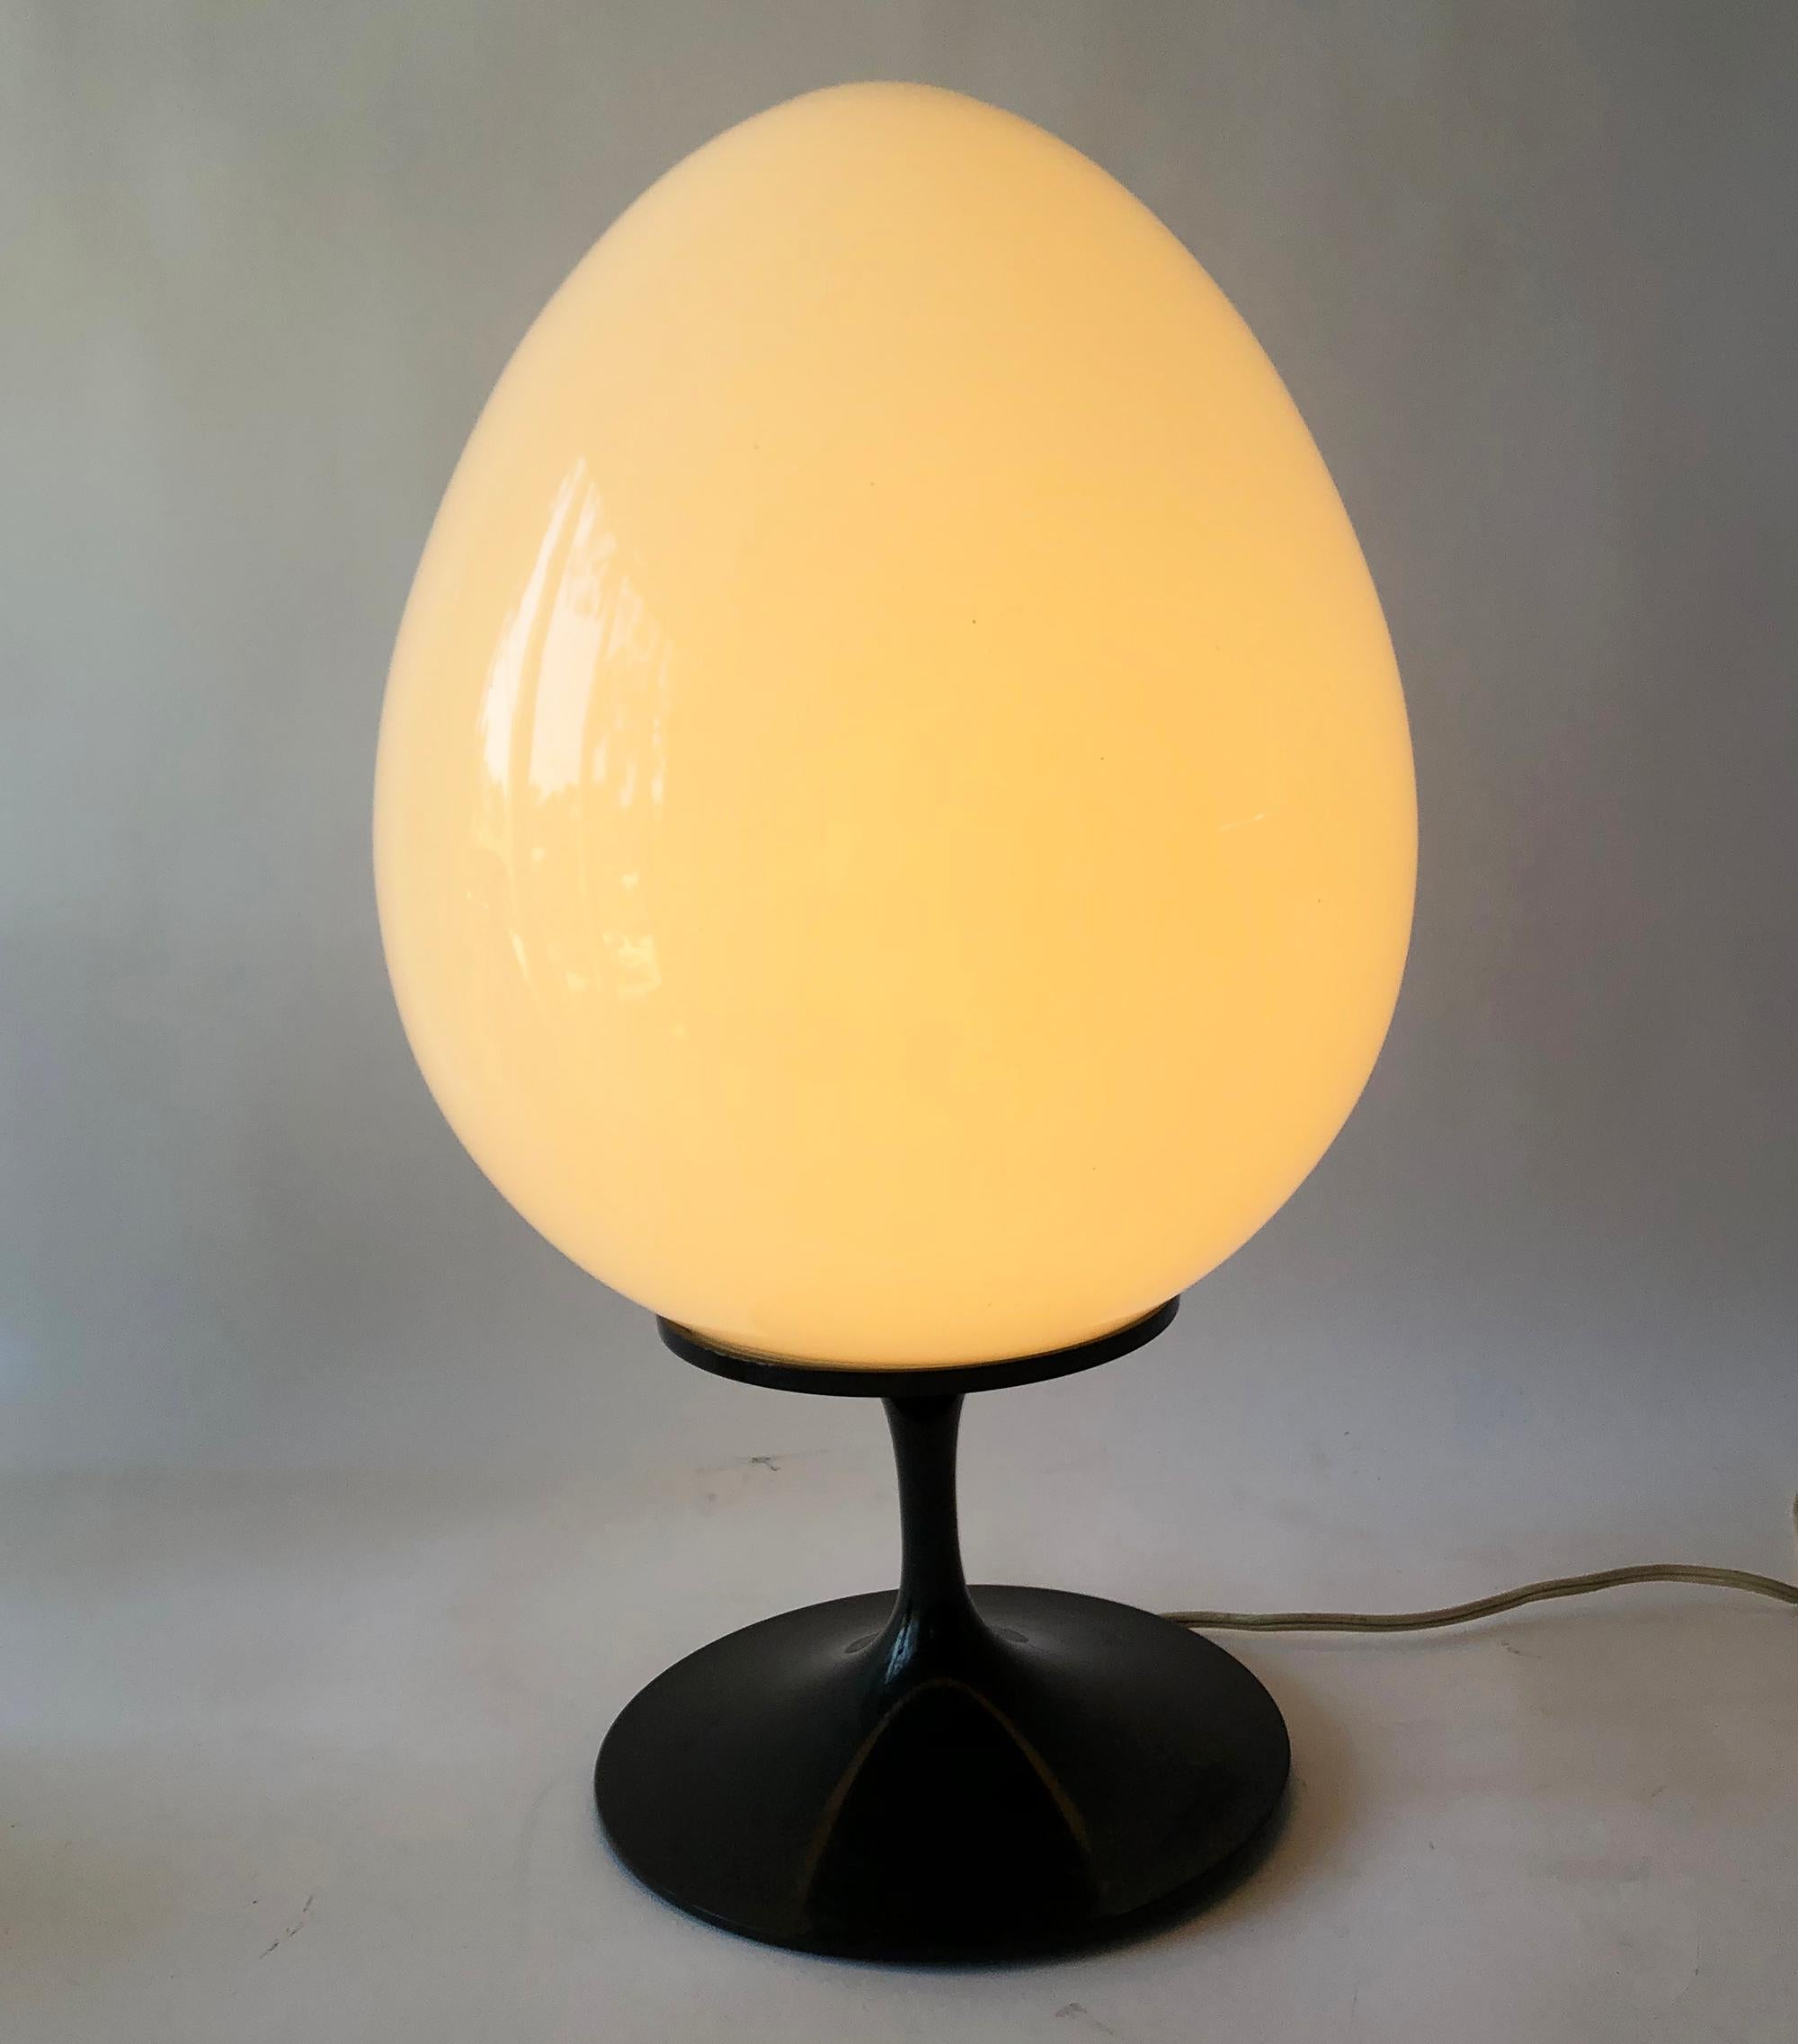 Bill Curry for Stemlite Design Line black lamp with glossy glass egg shade measures 17